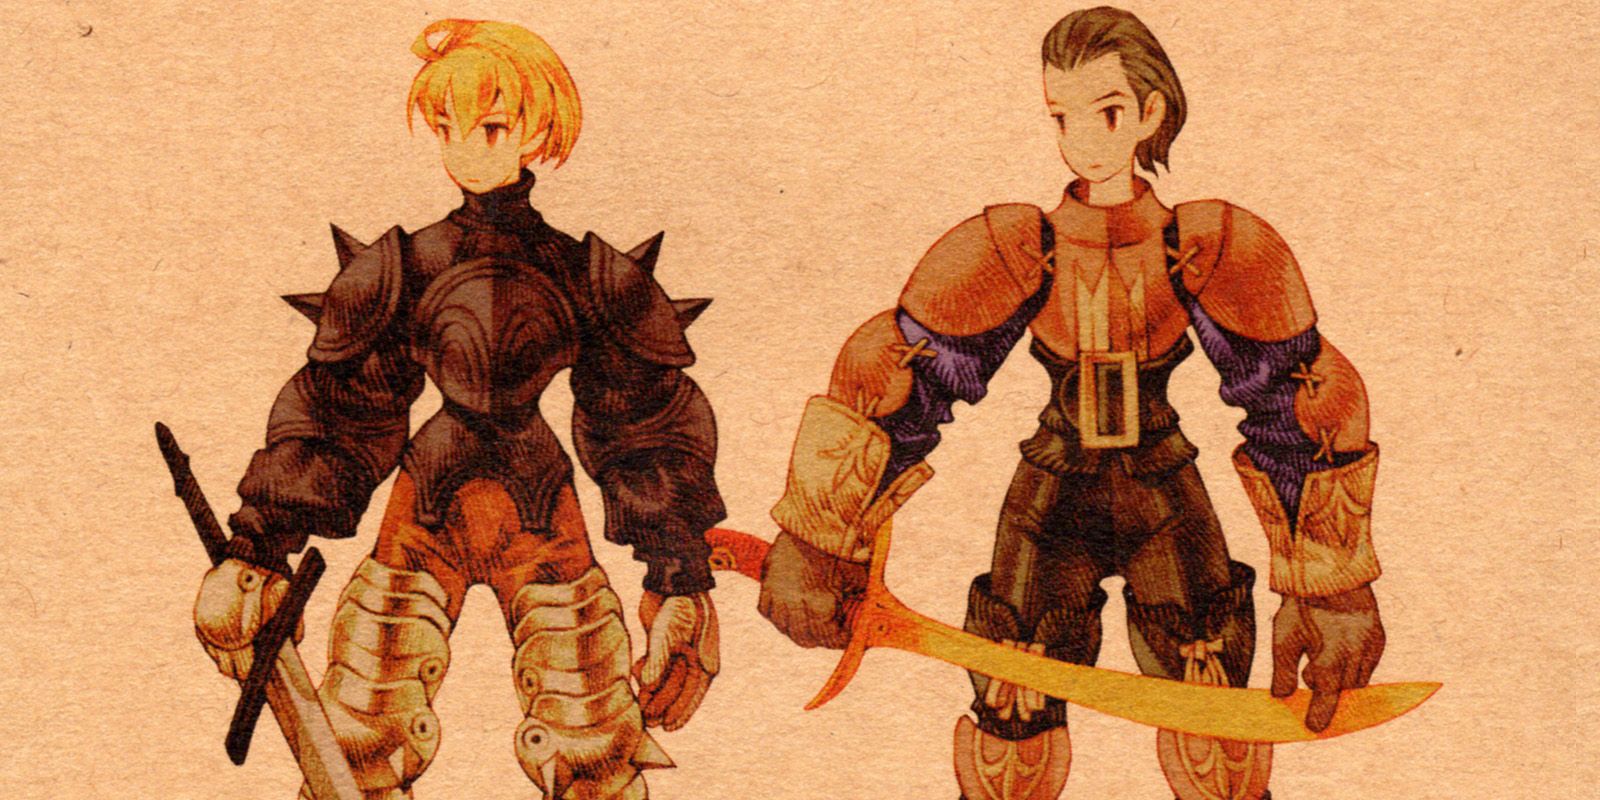 Final Fantasy Tactics: What Day The 25th Anniversary Actually Is